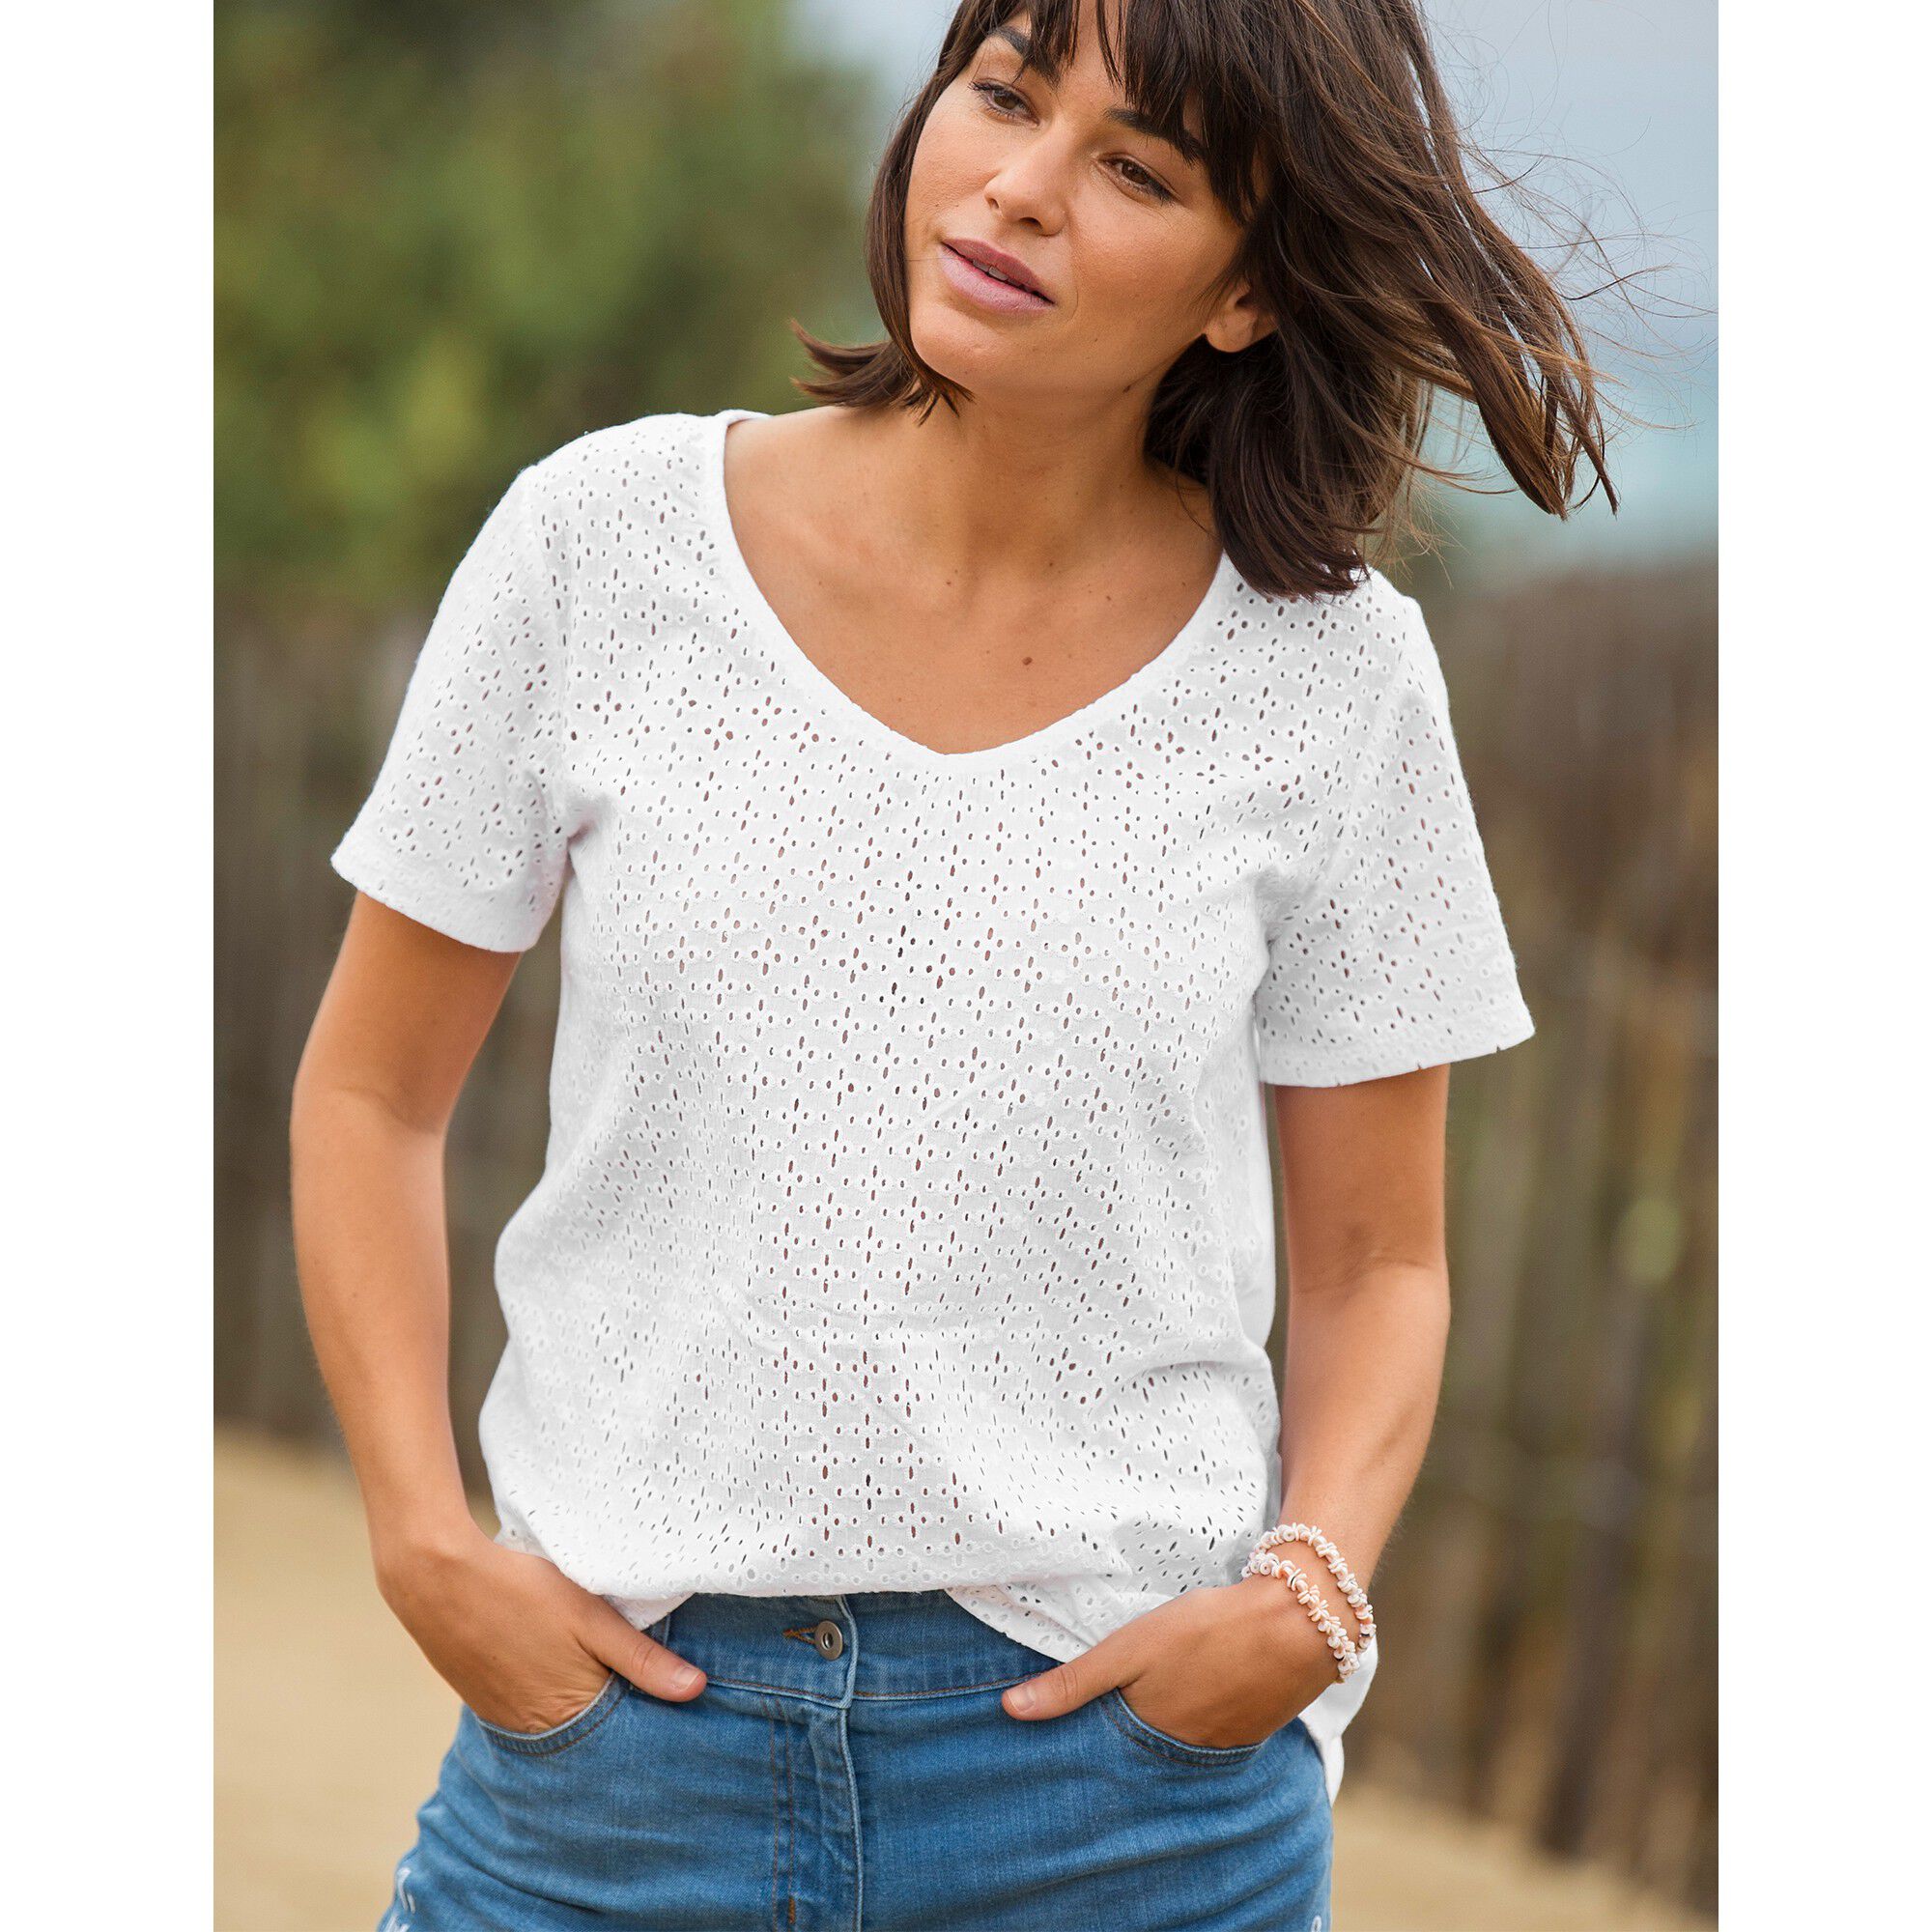 Blacheporte Femme Vêtements Tops & T-shirts T-shirts Manches courtes Tee-shirt Col V Broderie Anglaise 